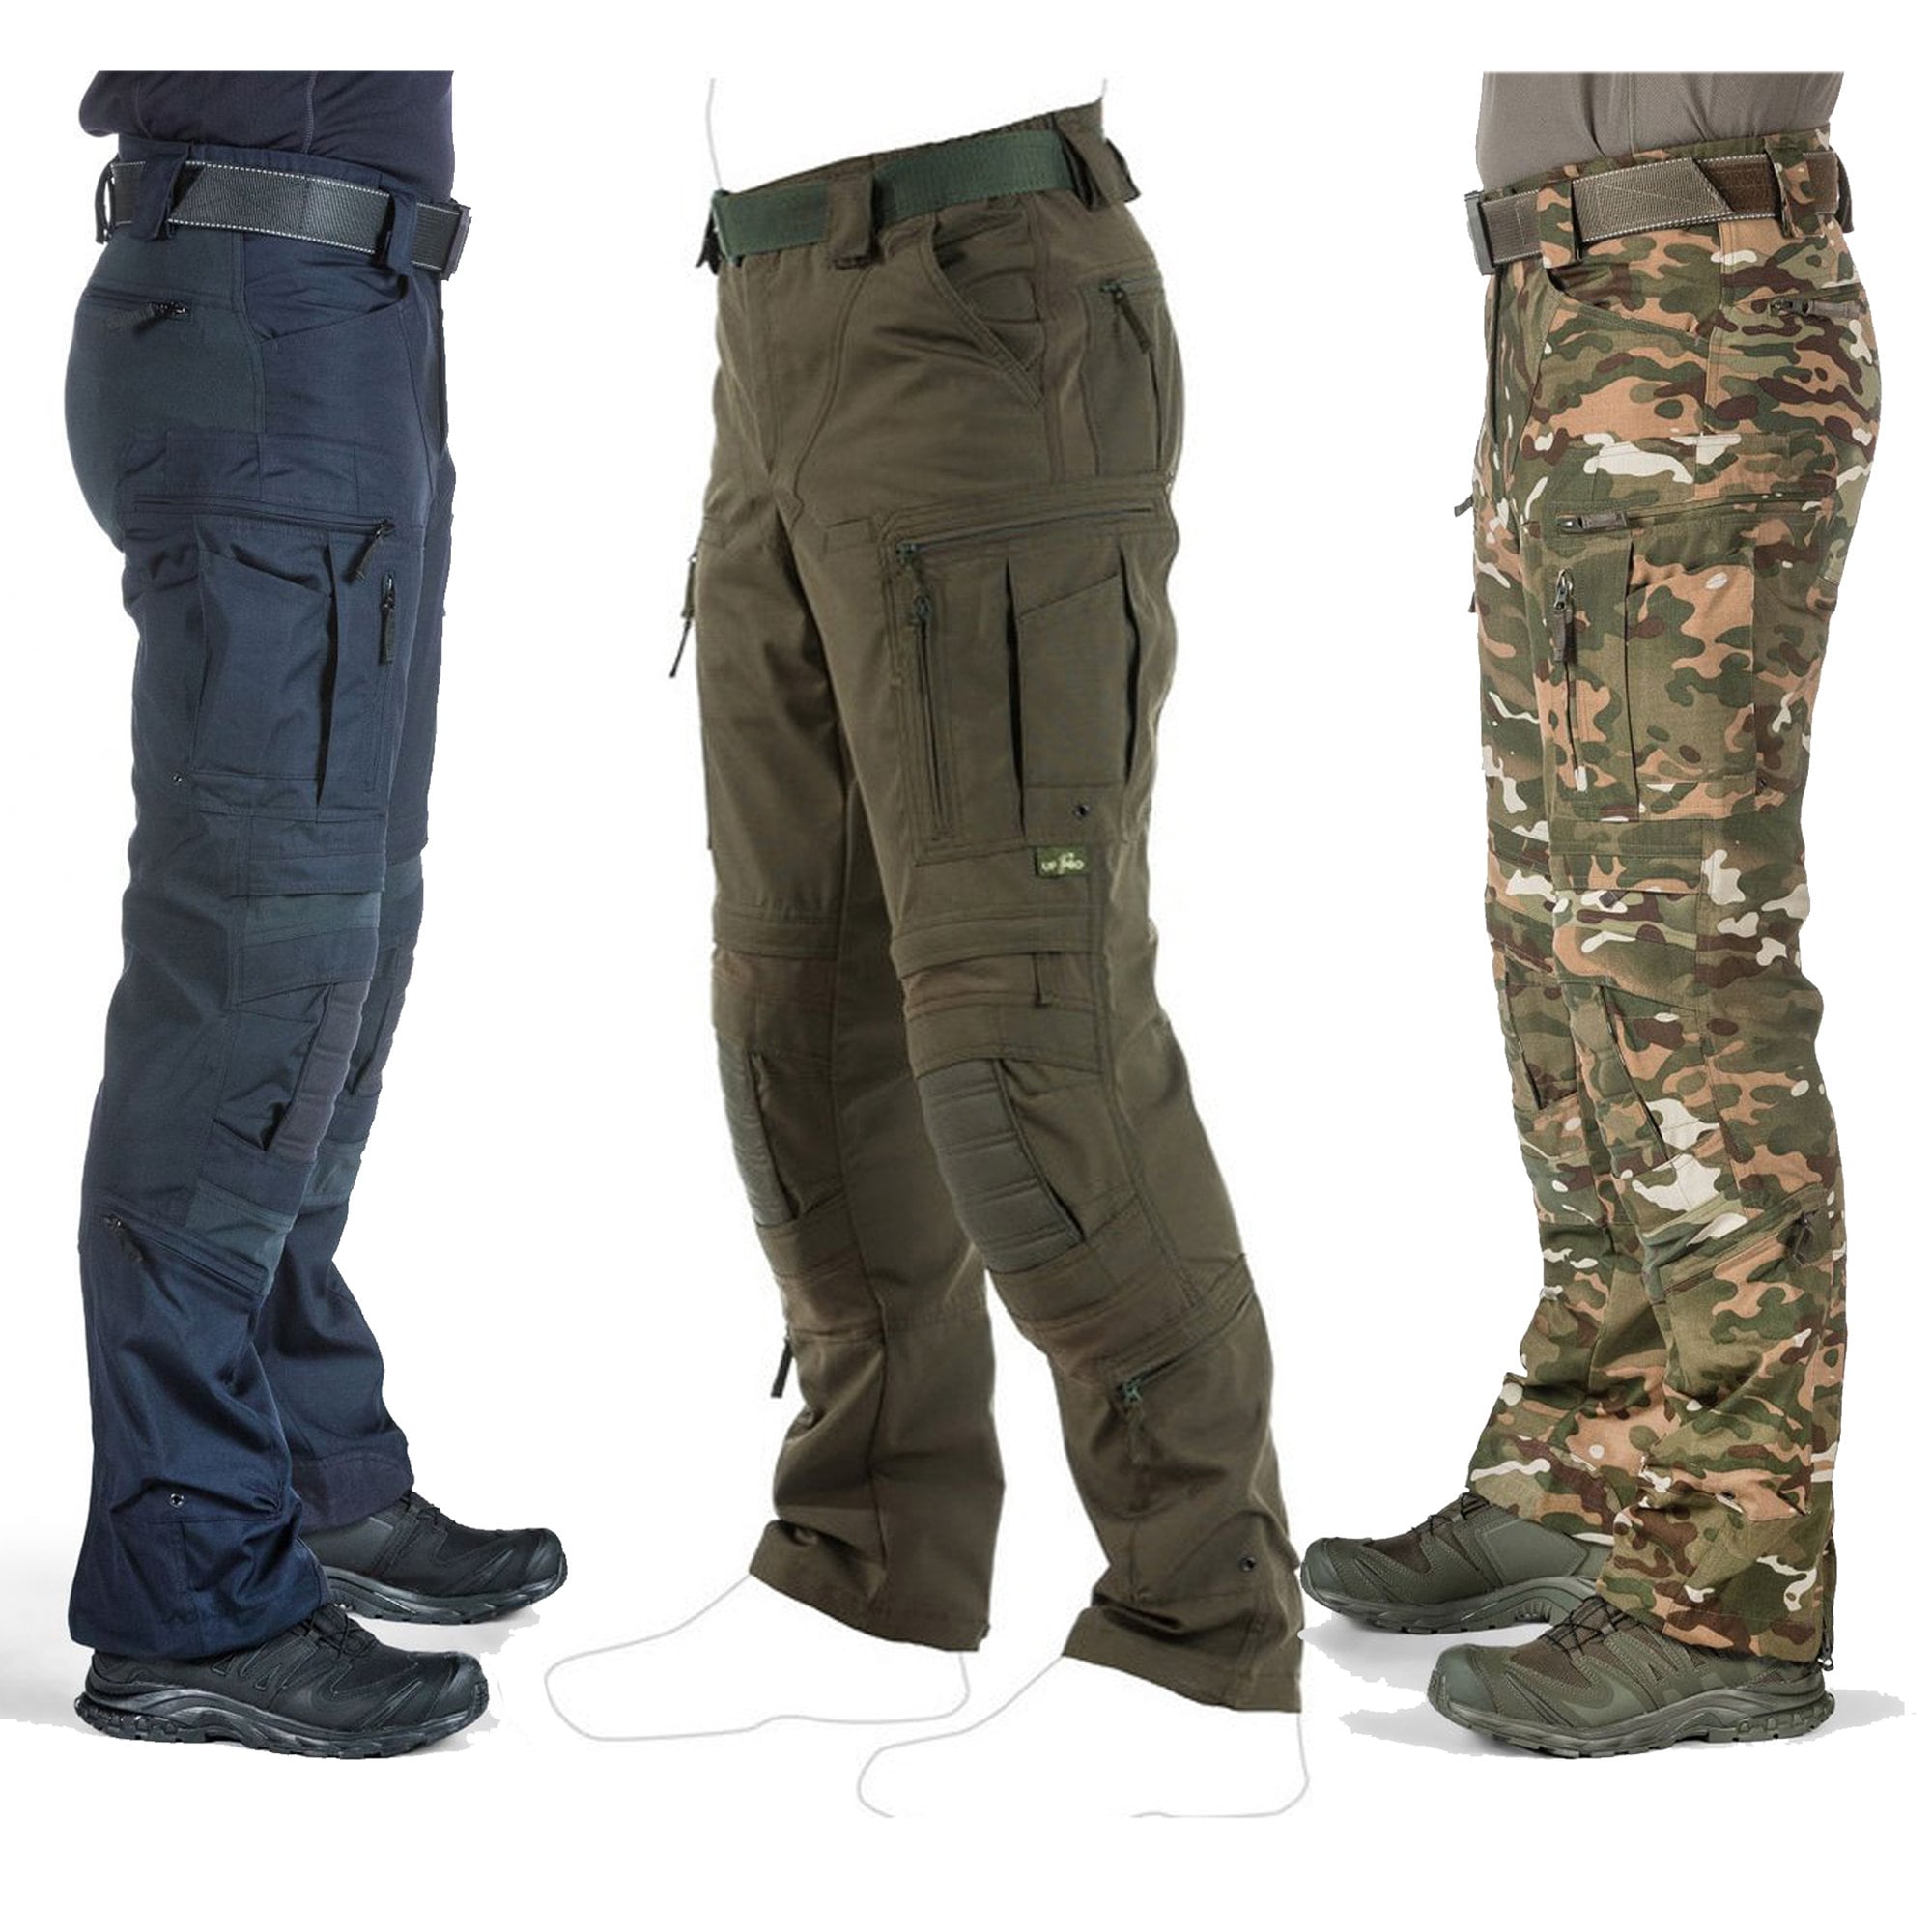 Tactical Pants With Knee Pads Army military Ripstop Combat Camo Trousers for Men 